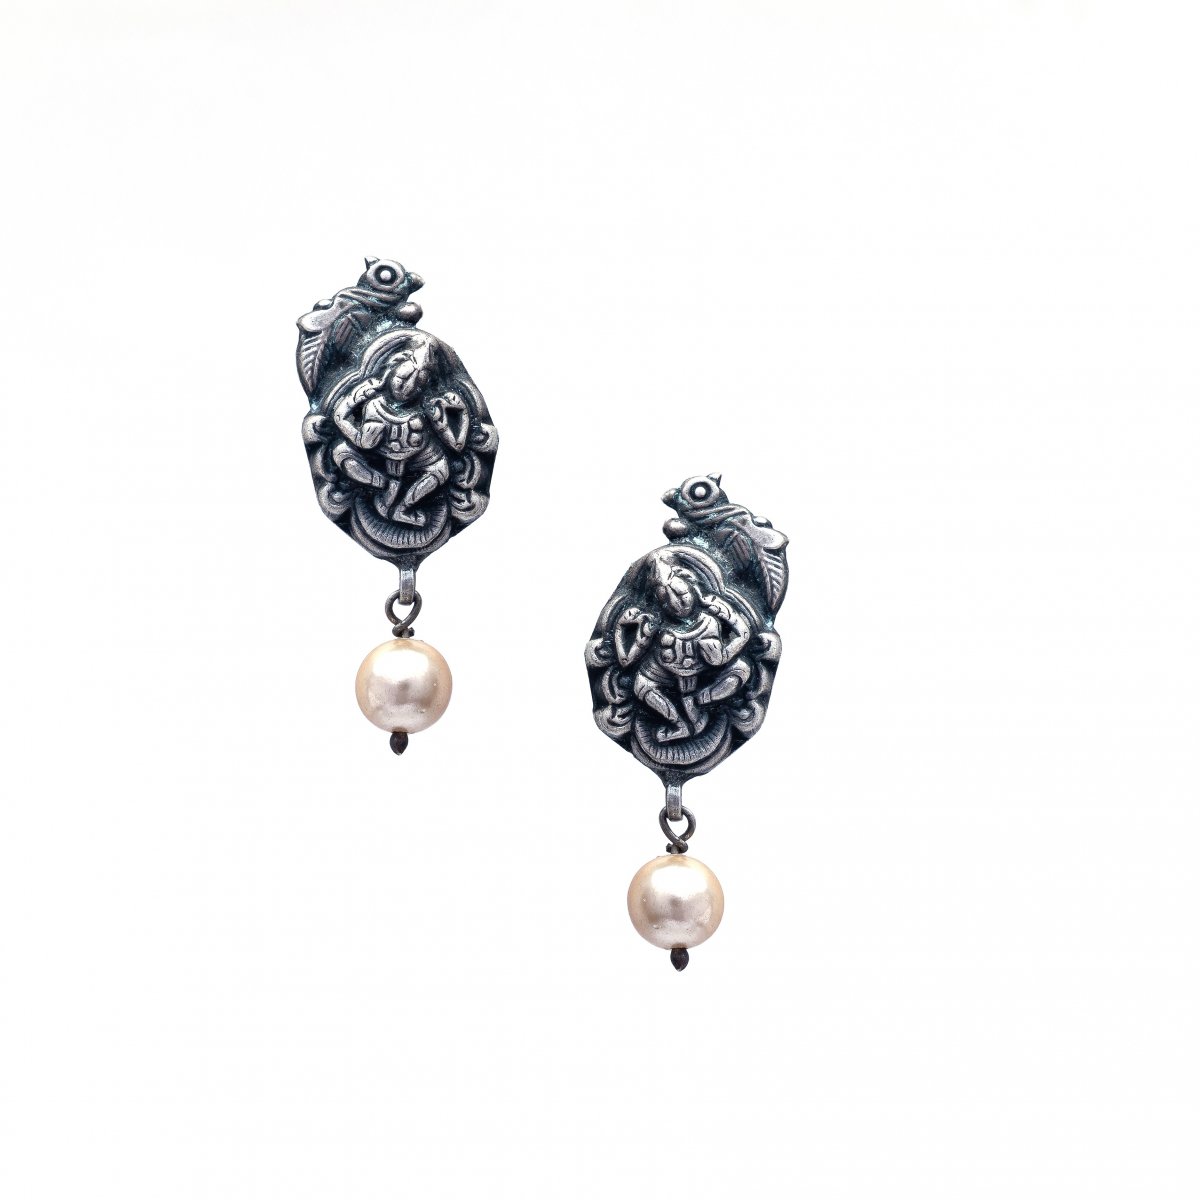 LIGHTWEIGHT SILVER OXIDIZED TRADITIONAL JHUMKA EARRINGS FOR WOMEN AND GIRLS 